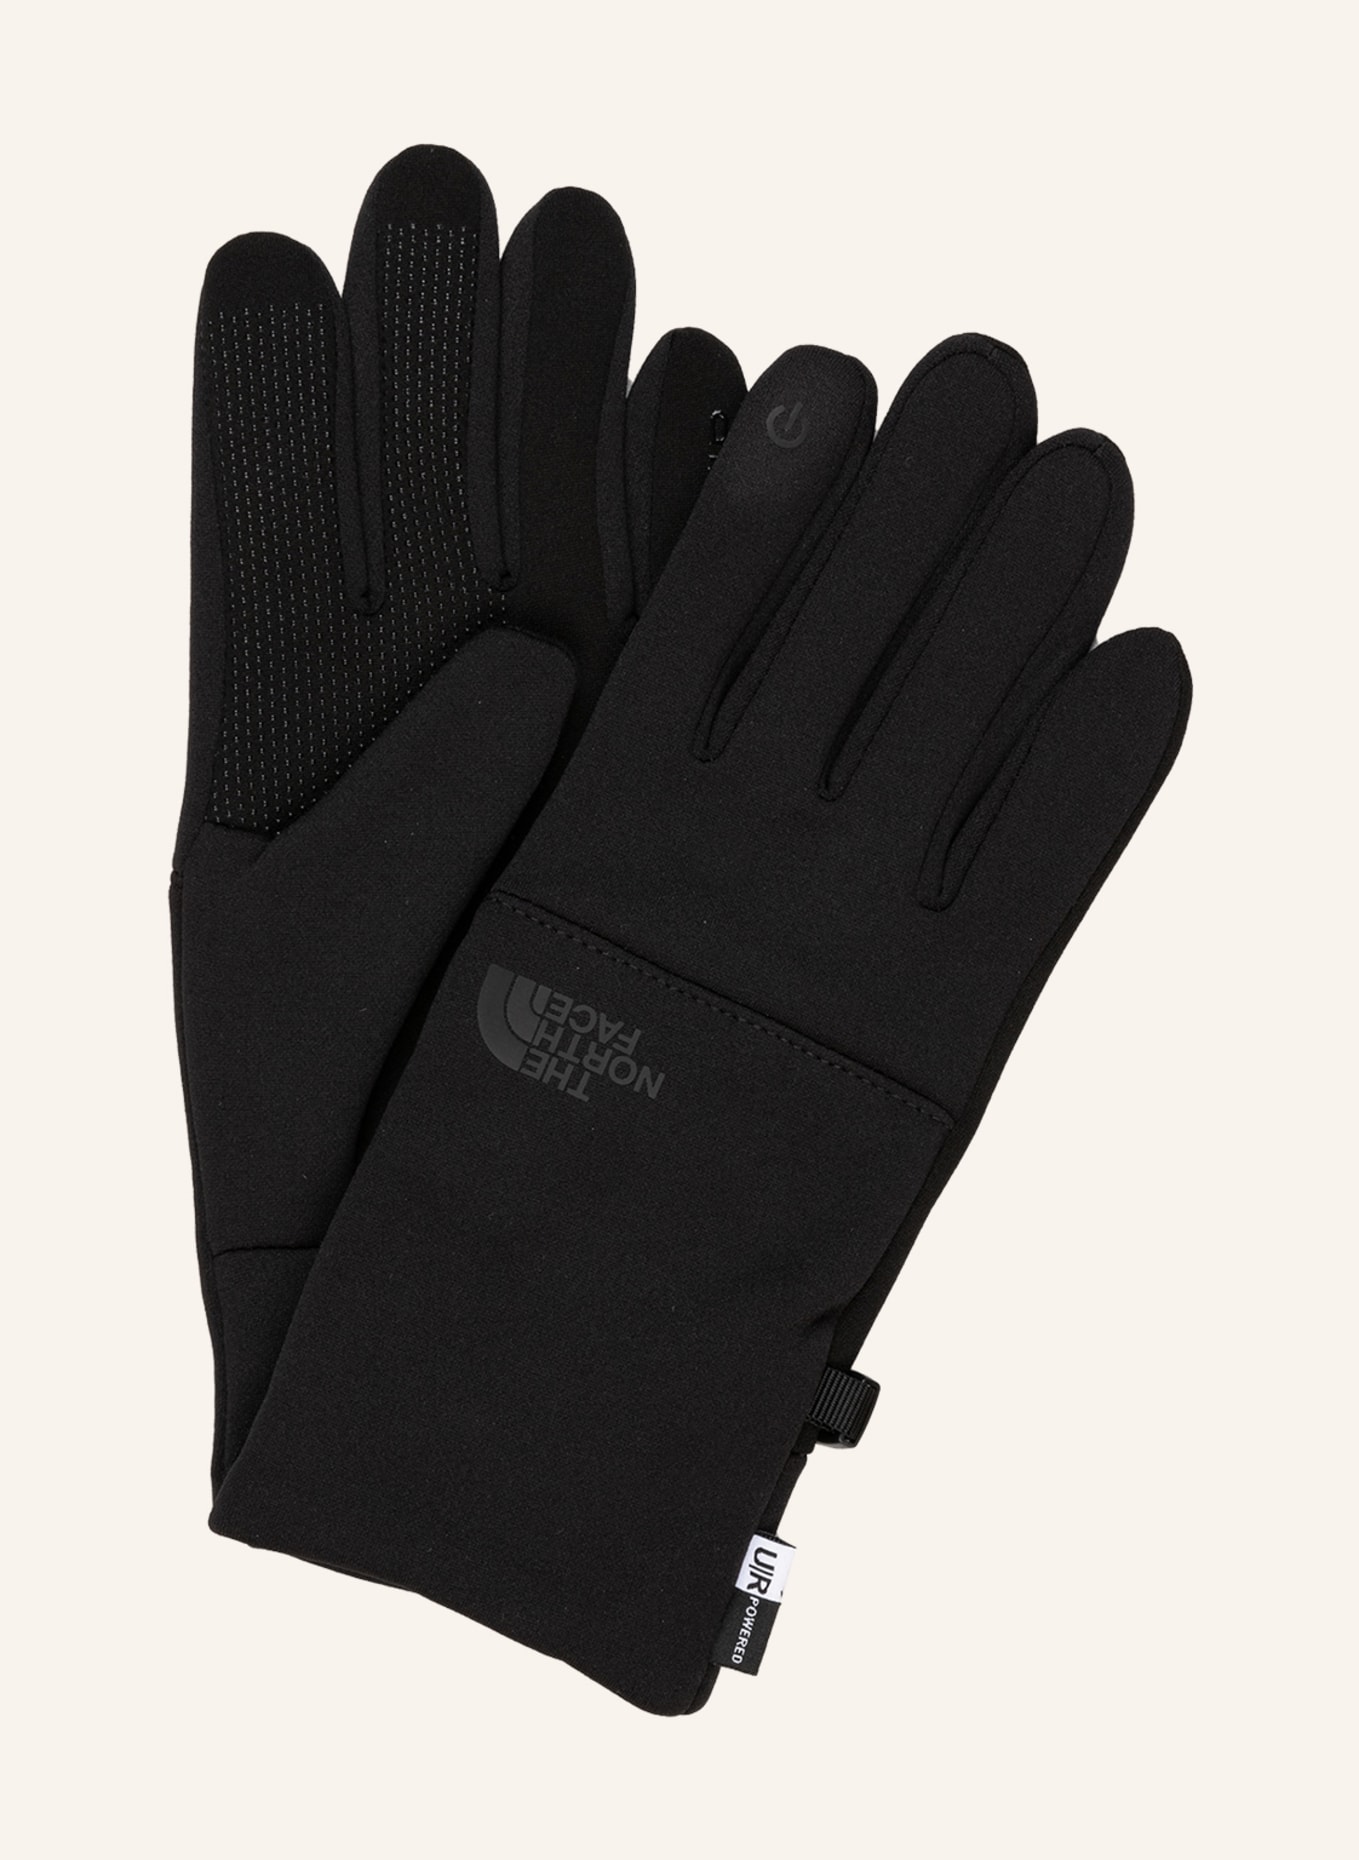 THE NORTH FACE black function Multisport ETIP touchscreen with gloves in